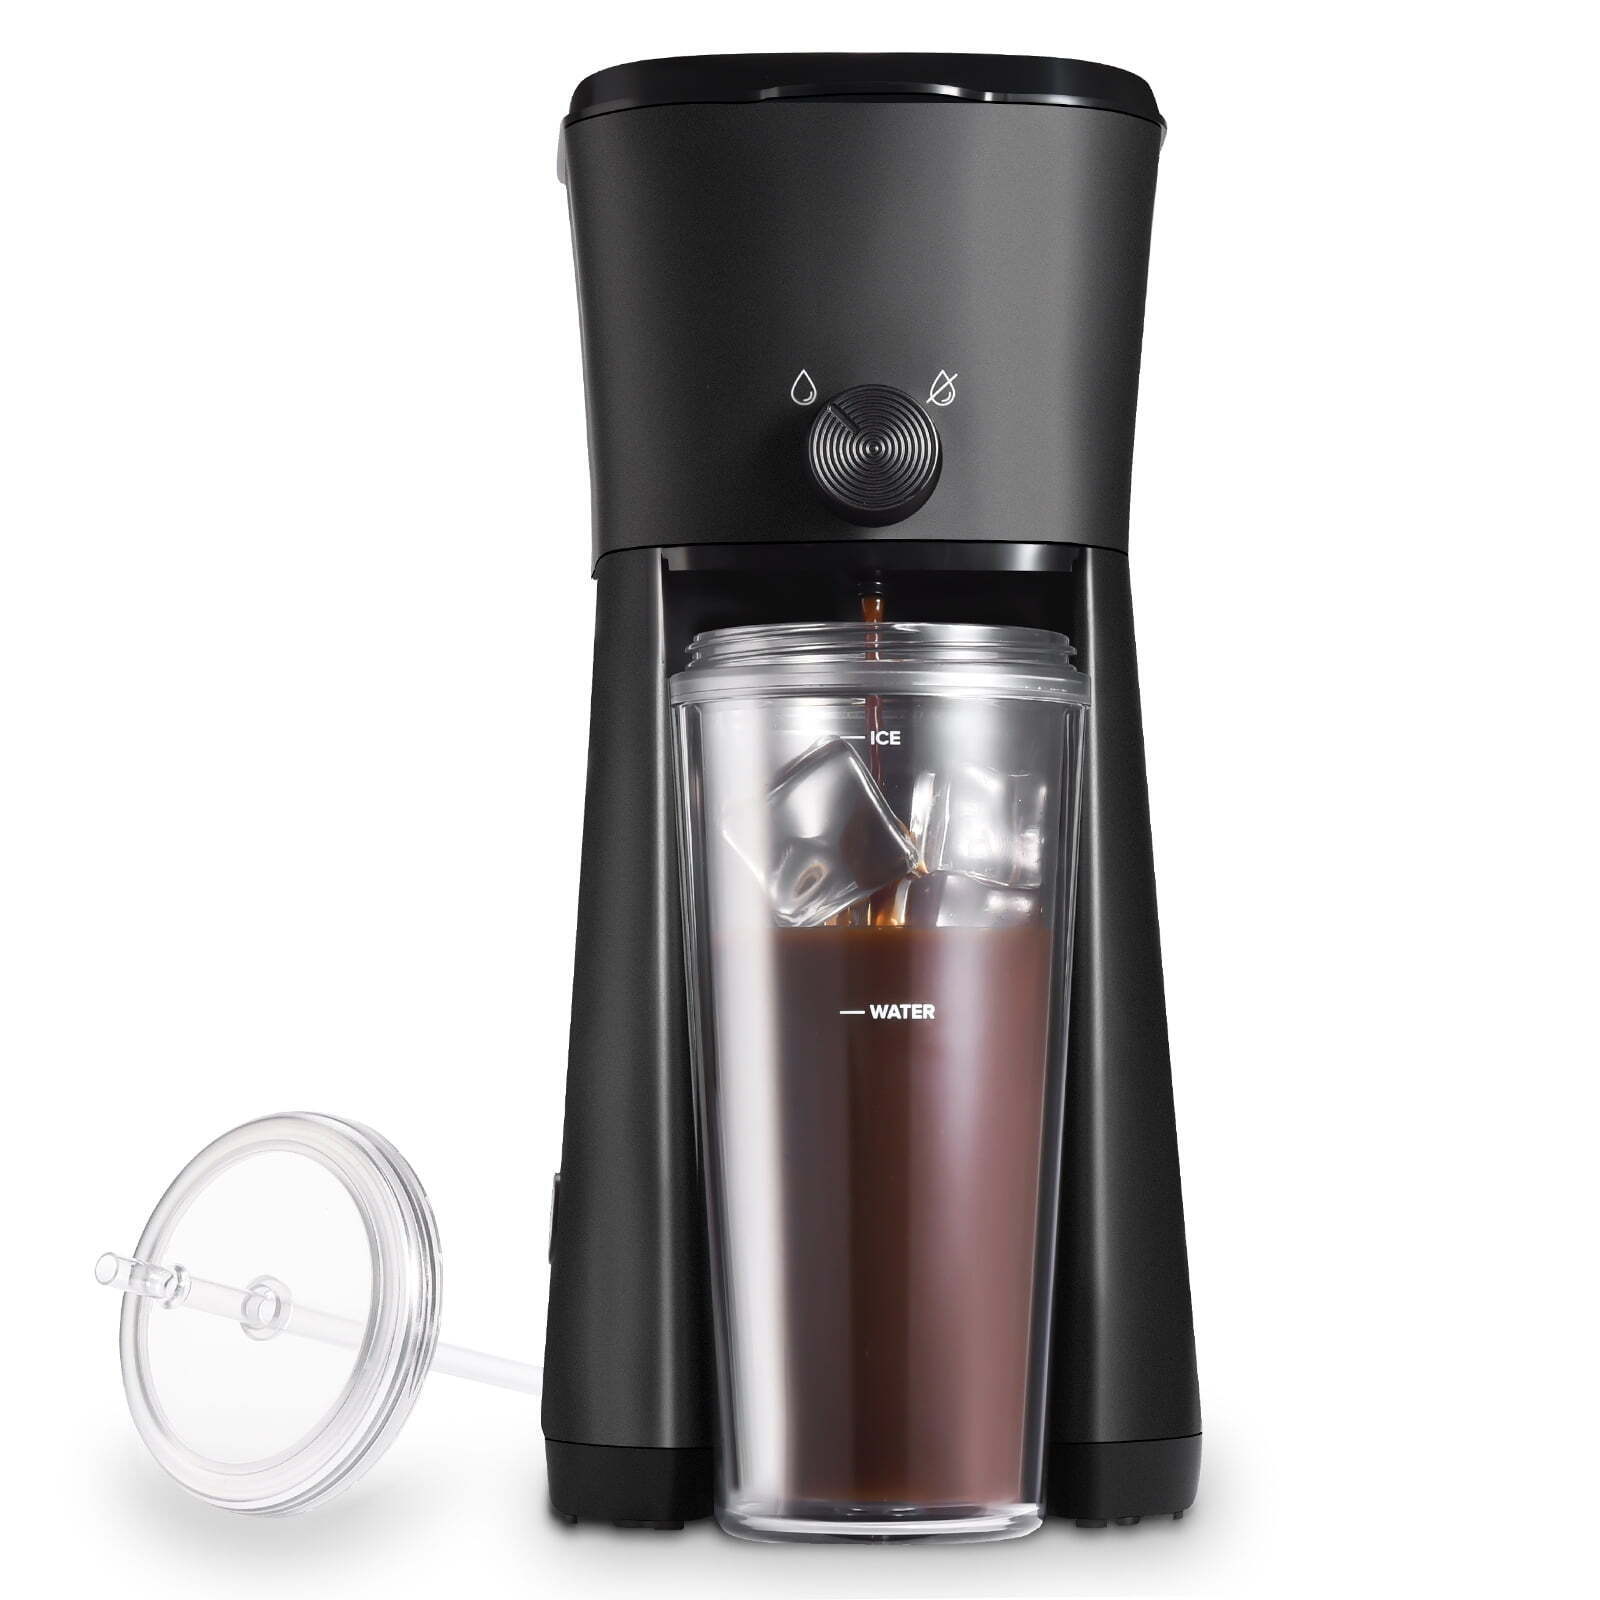 Mainstays 28035441 Iced Coffee Maker with 20 fl oz Reusable Tumbler and Filter,